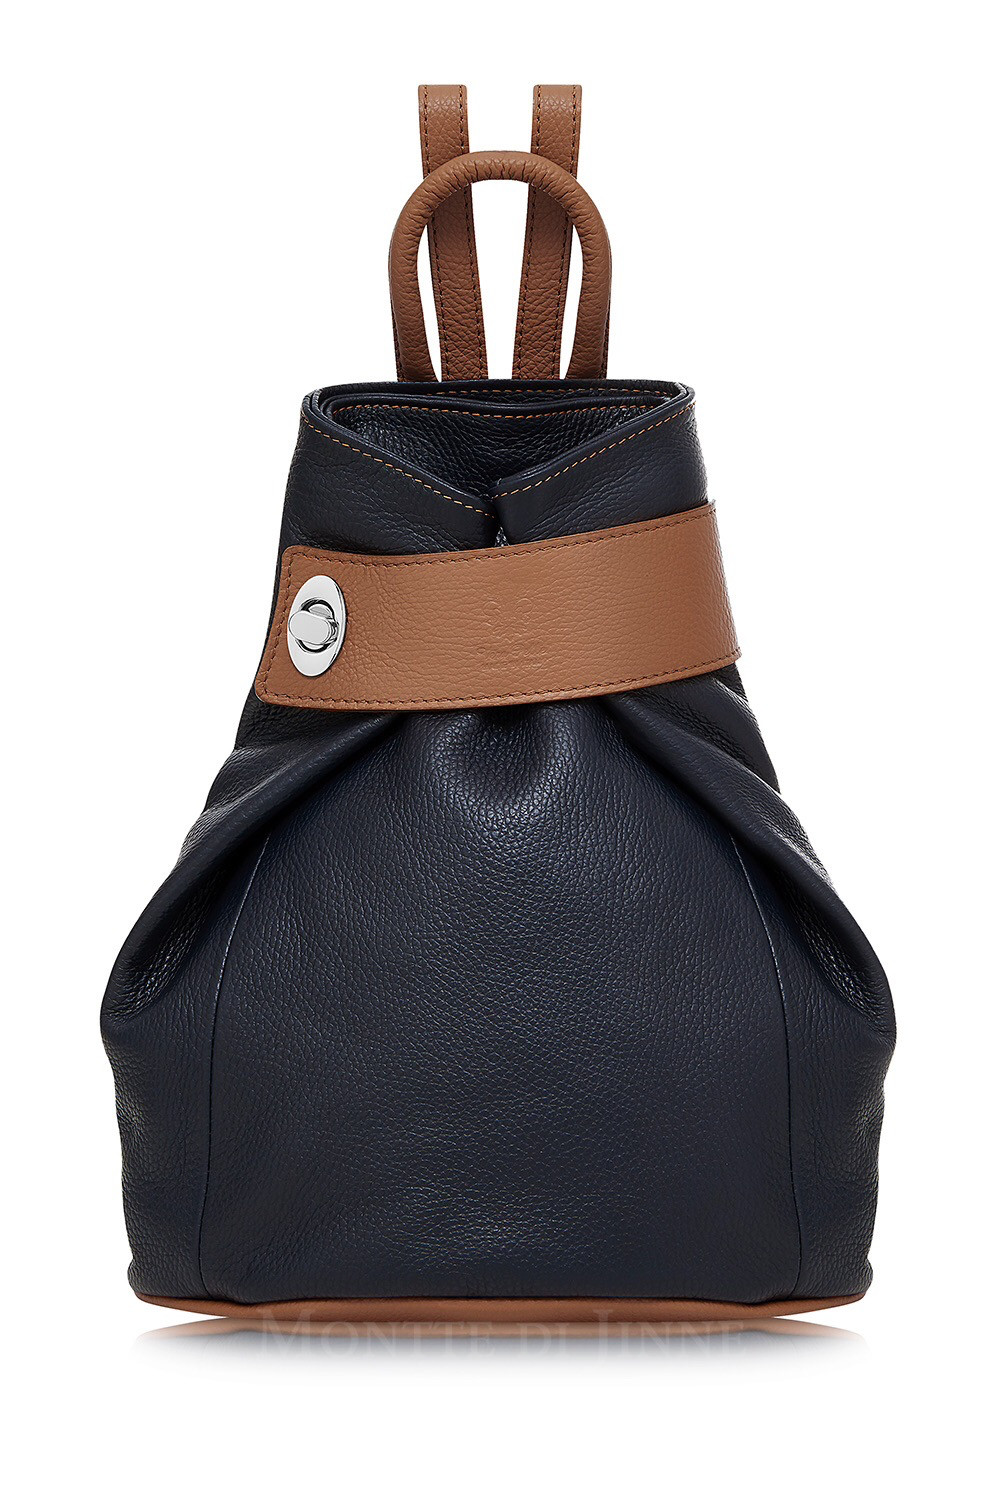 Navy Body With Tan Trim Lock Backpack 